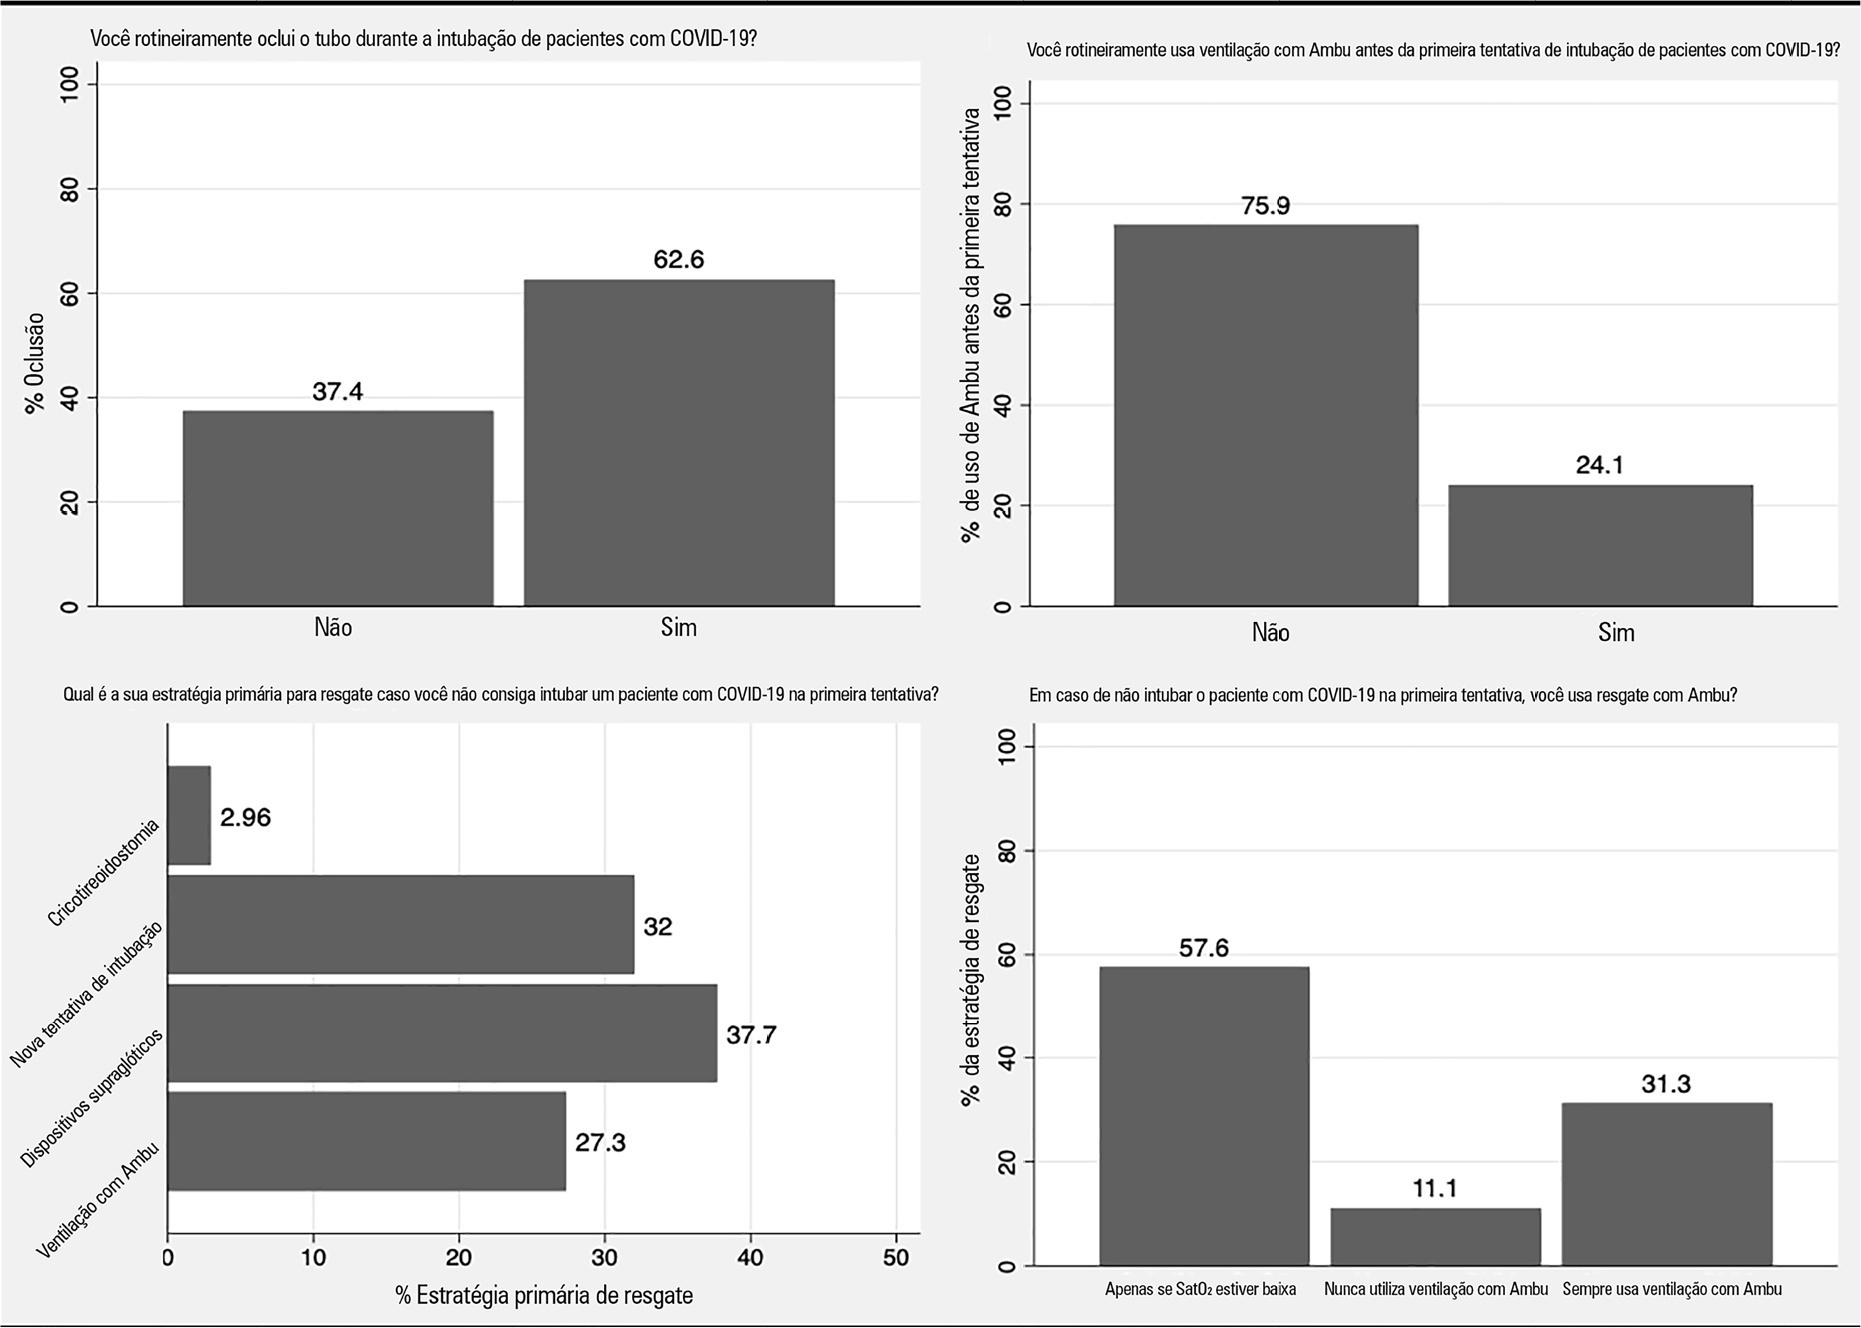 Endotracheal intubation in COVID-19 patients in Brazil: a nationwide survey